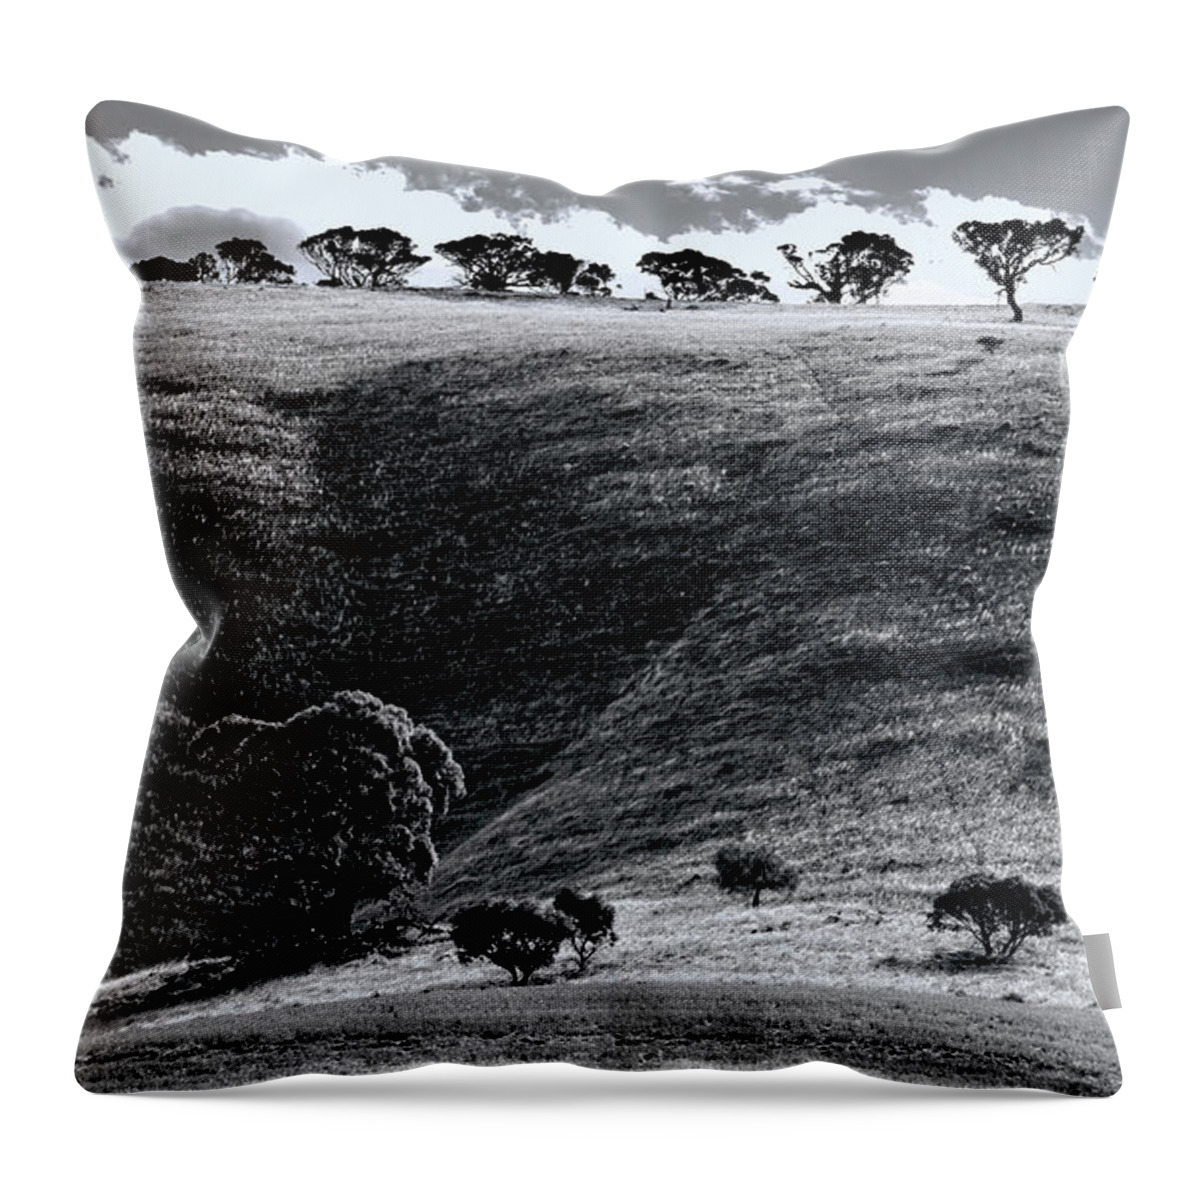 Hills Throw Pillow featuring the photograph Sun On The Hills by Wayne Sherriff